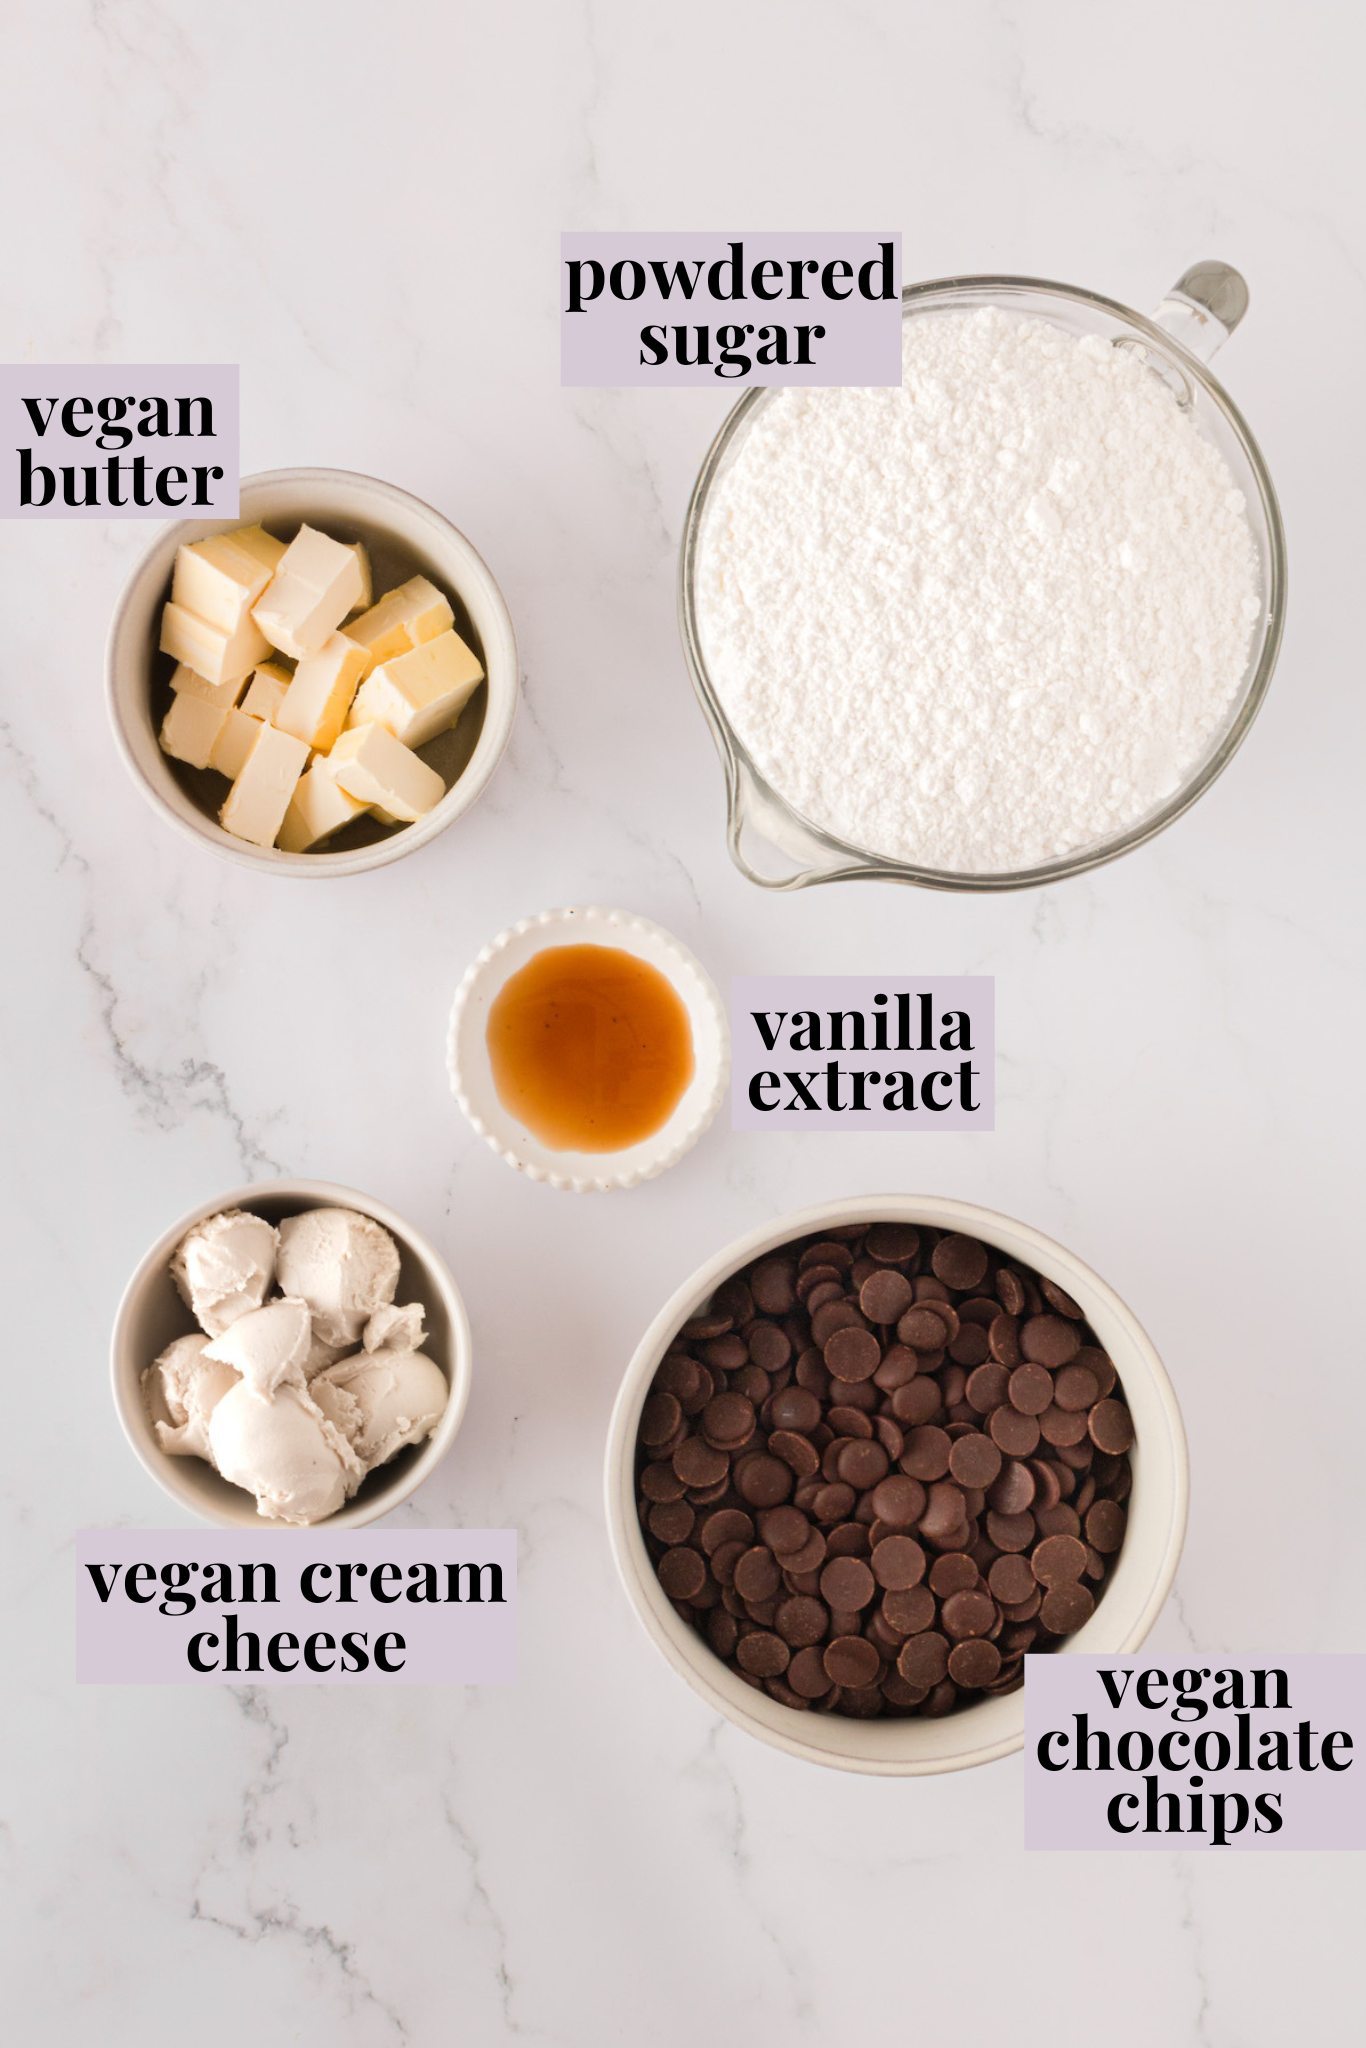 Overhead view of ingredients for vegan bon bons with labels